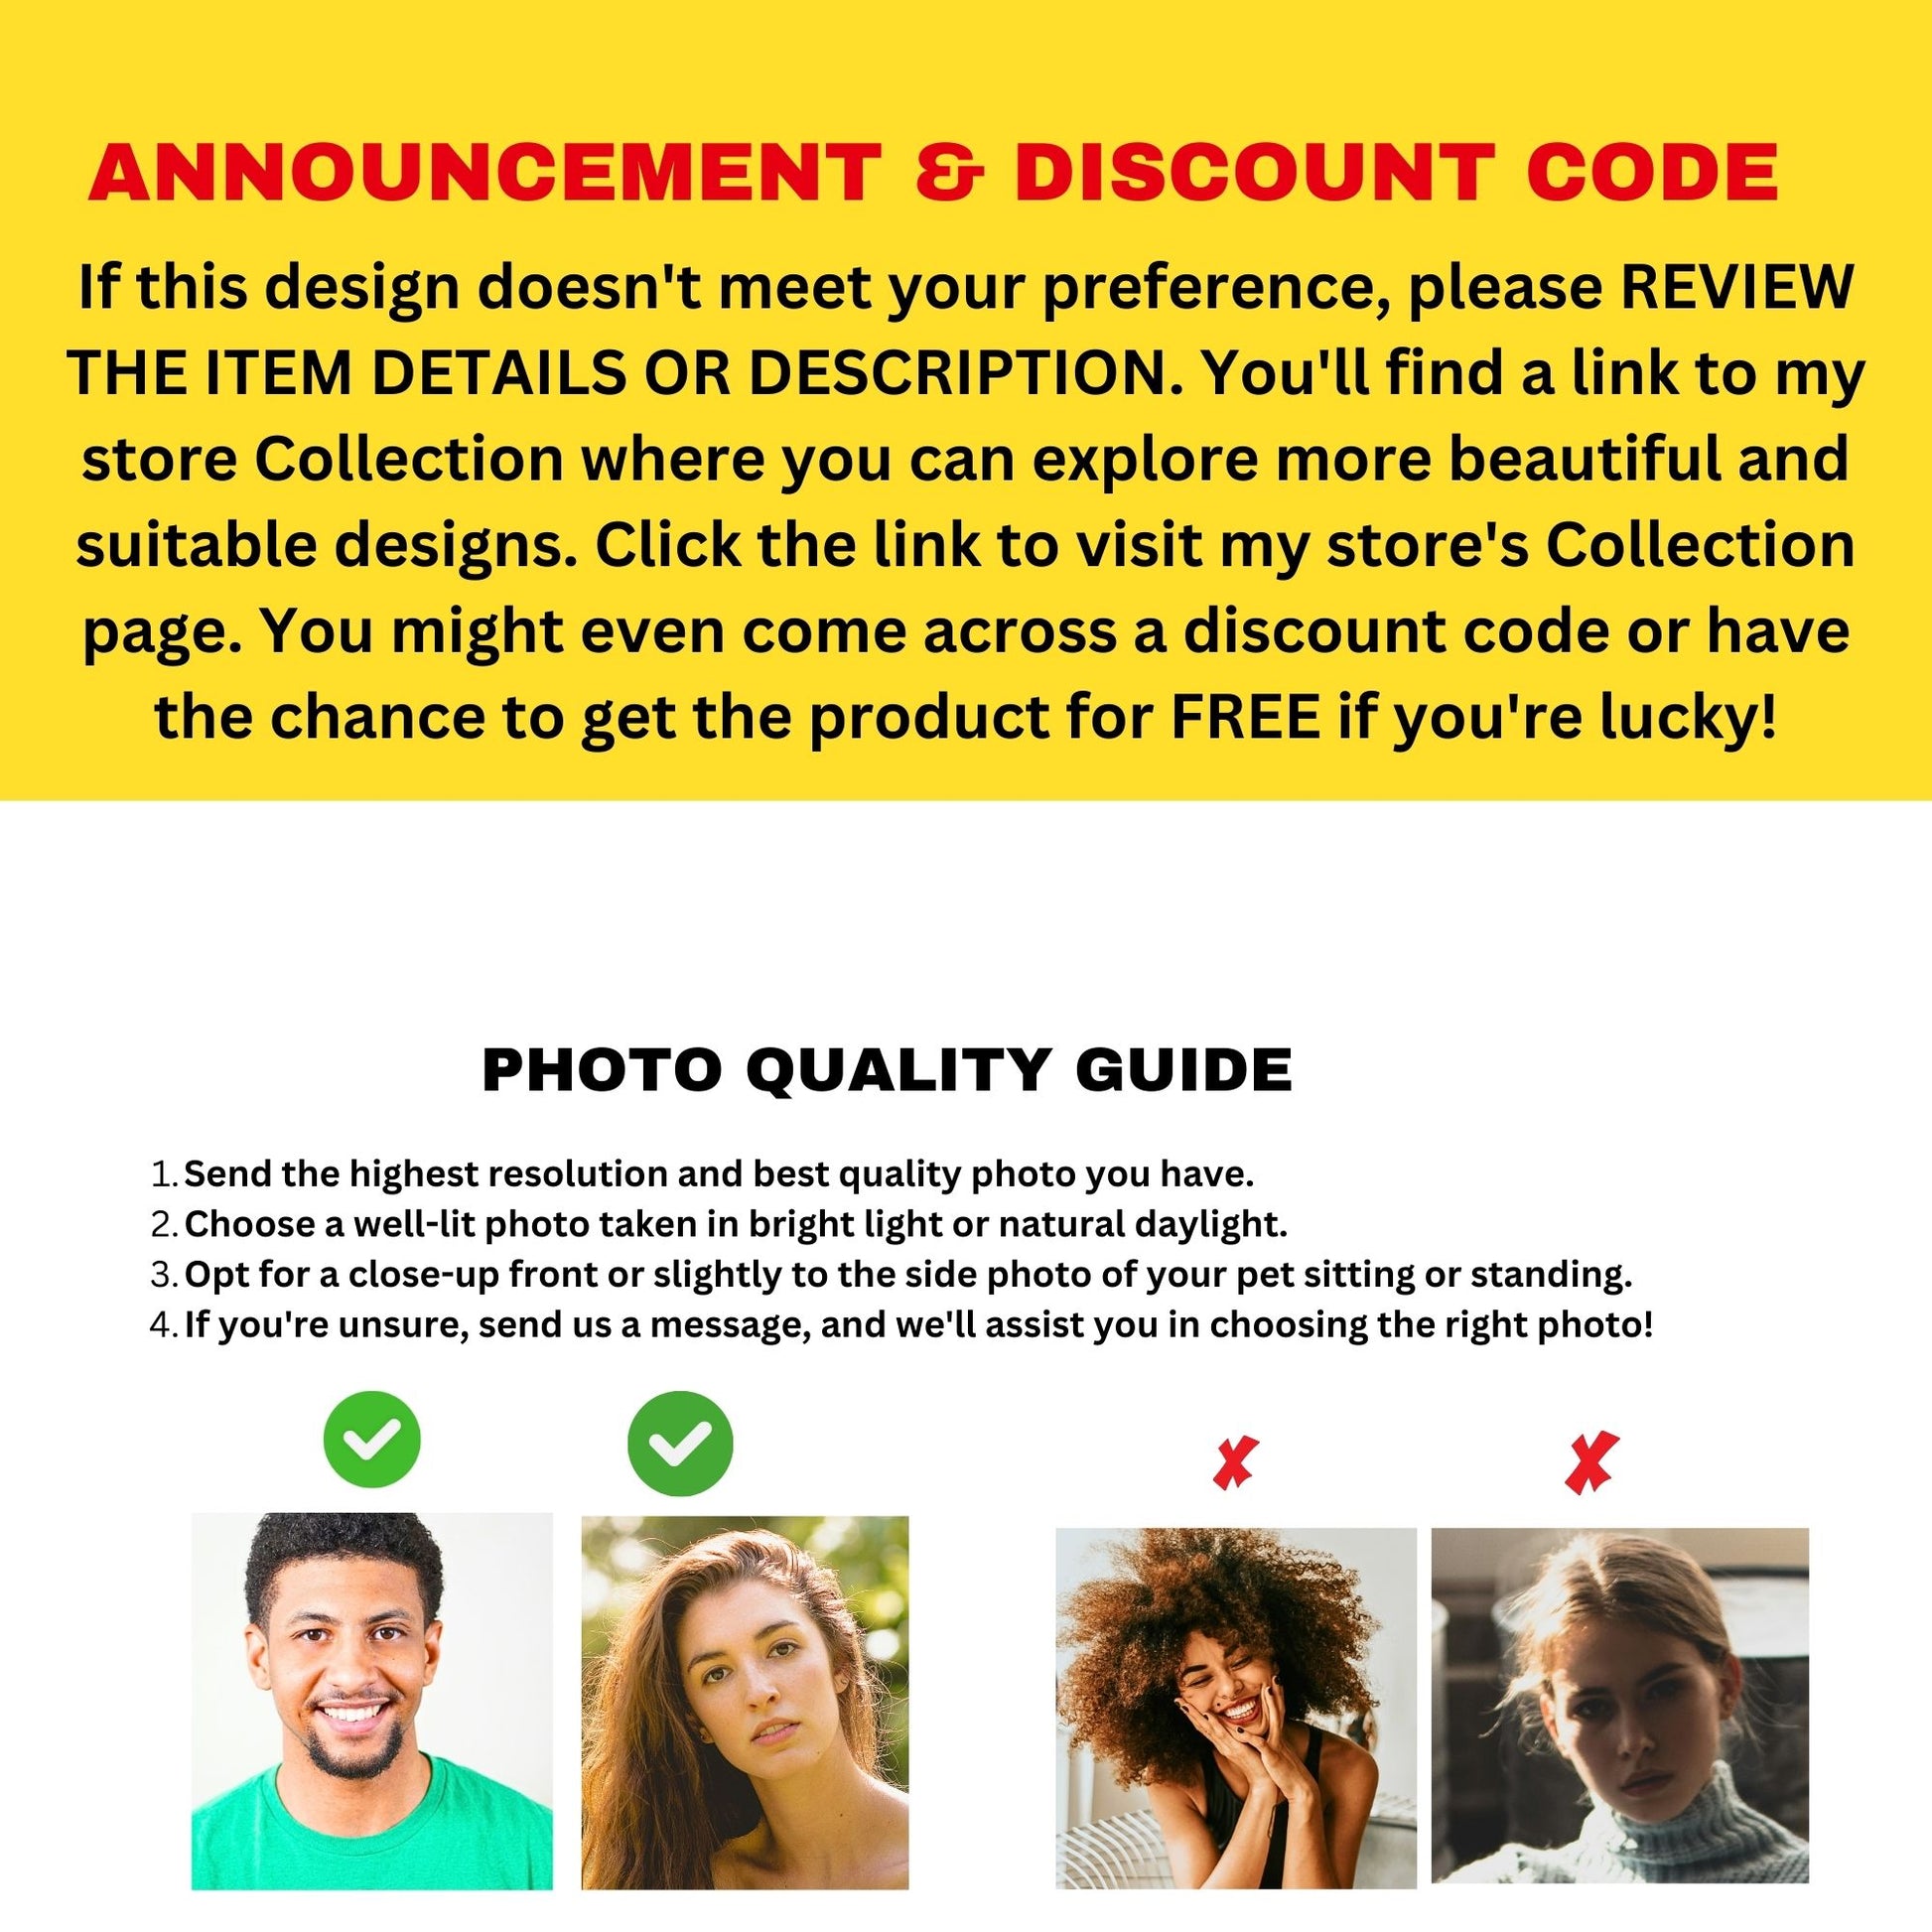 Announcement and discount